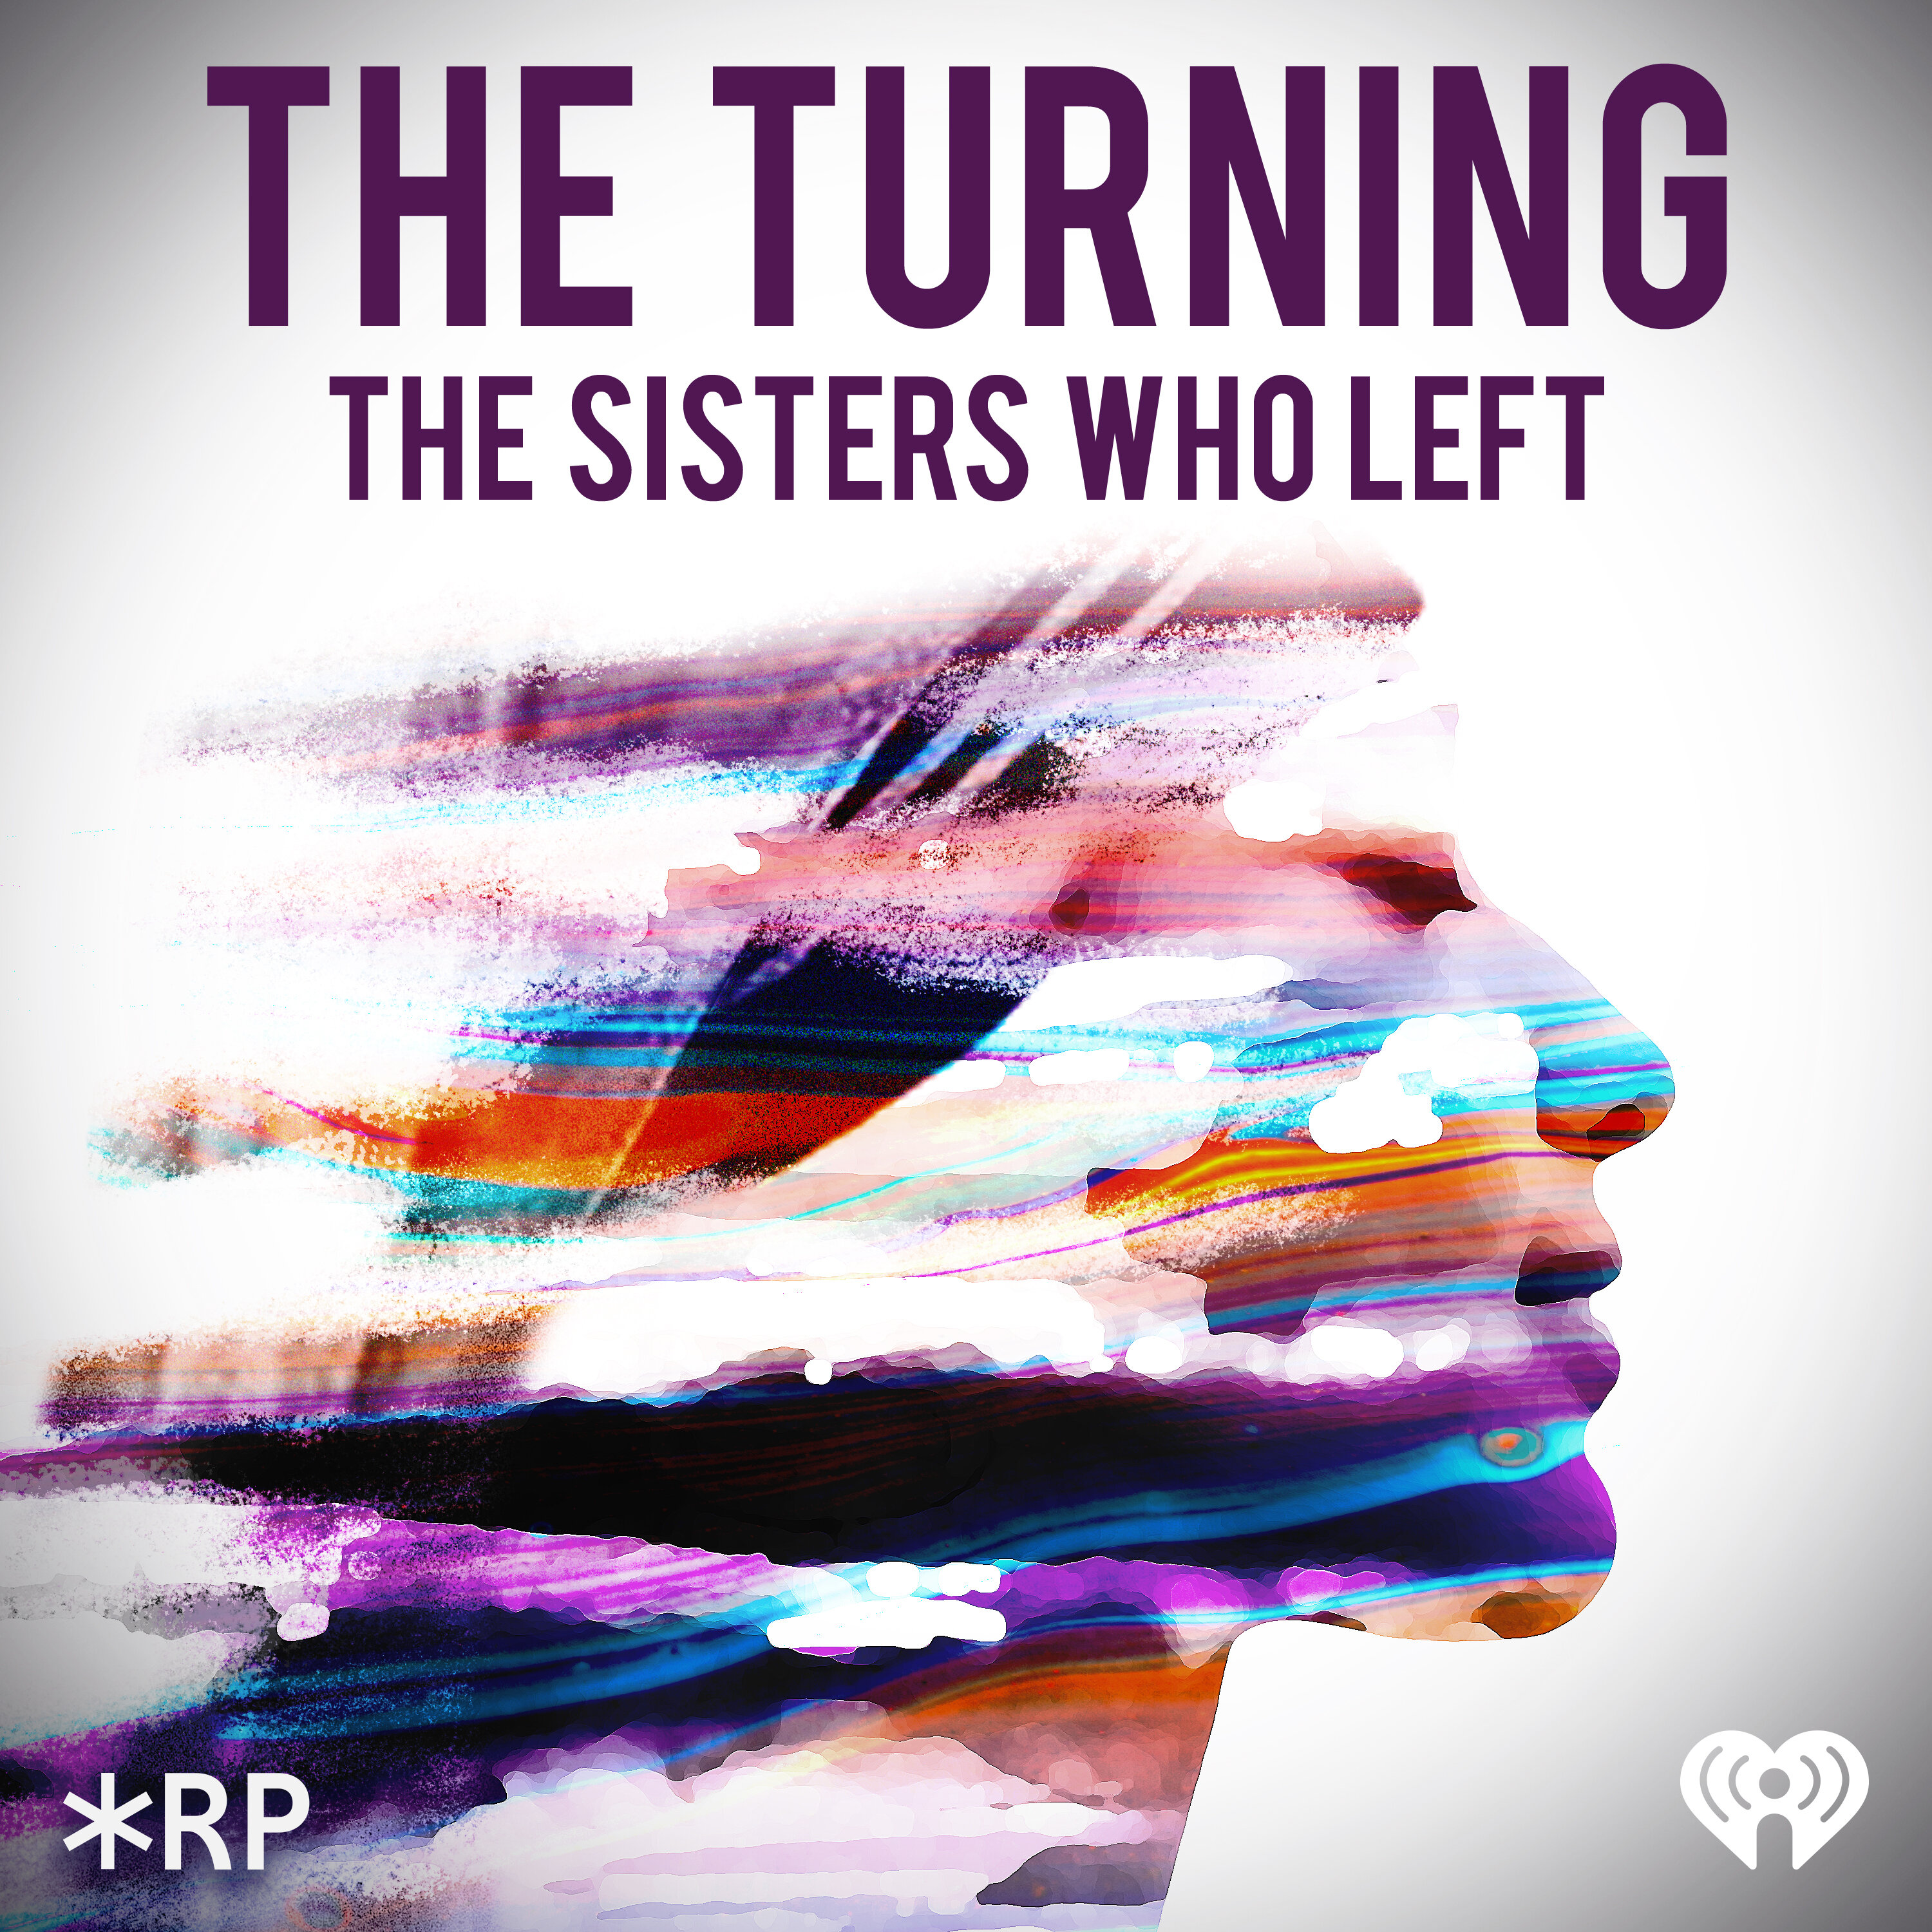 Introducing S1: The Turning: The Sisters Who Left